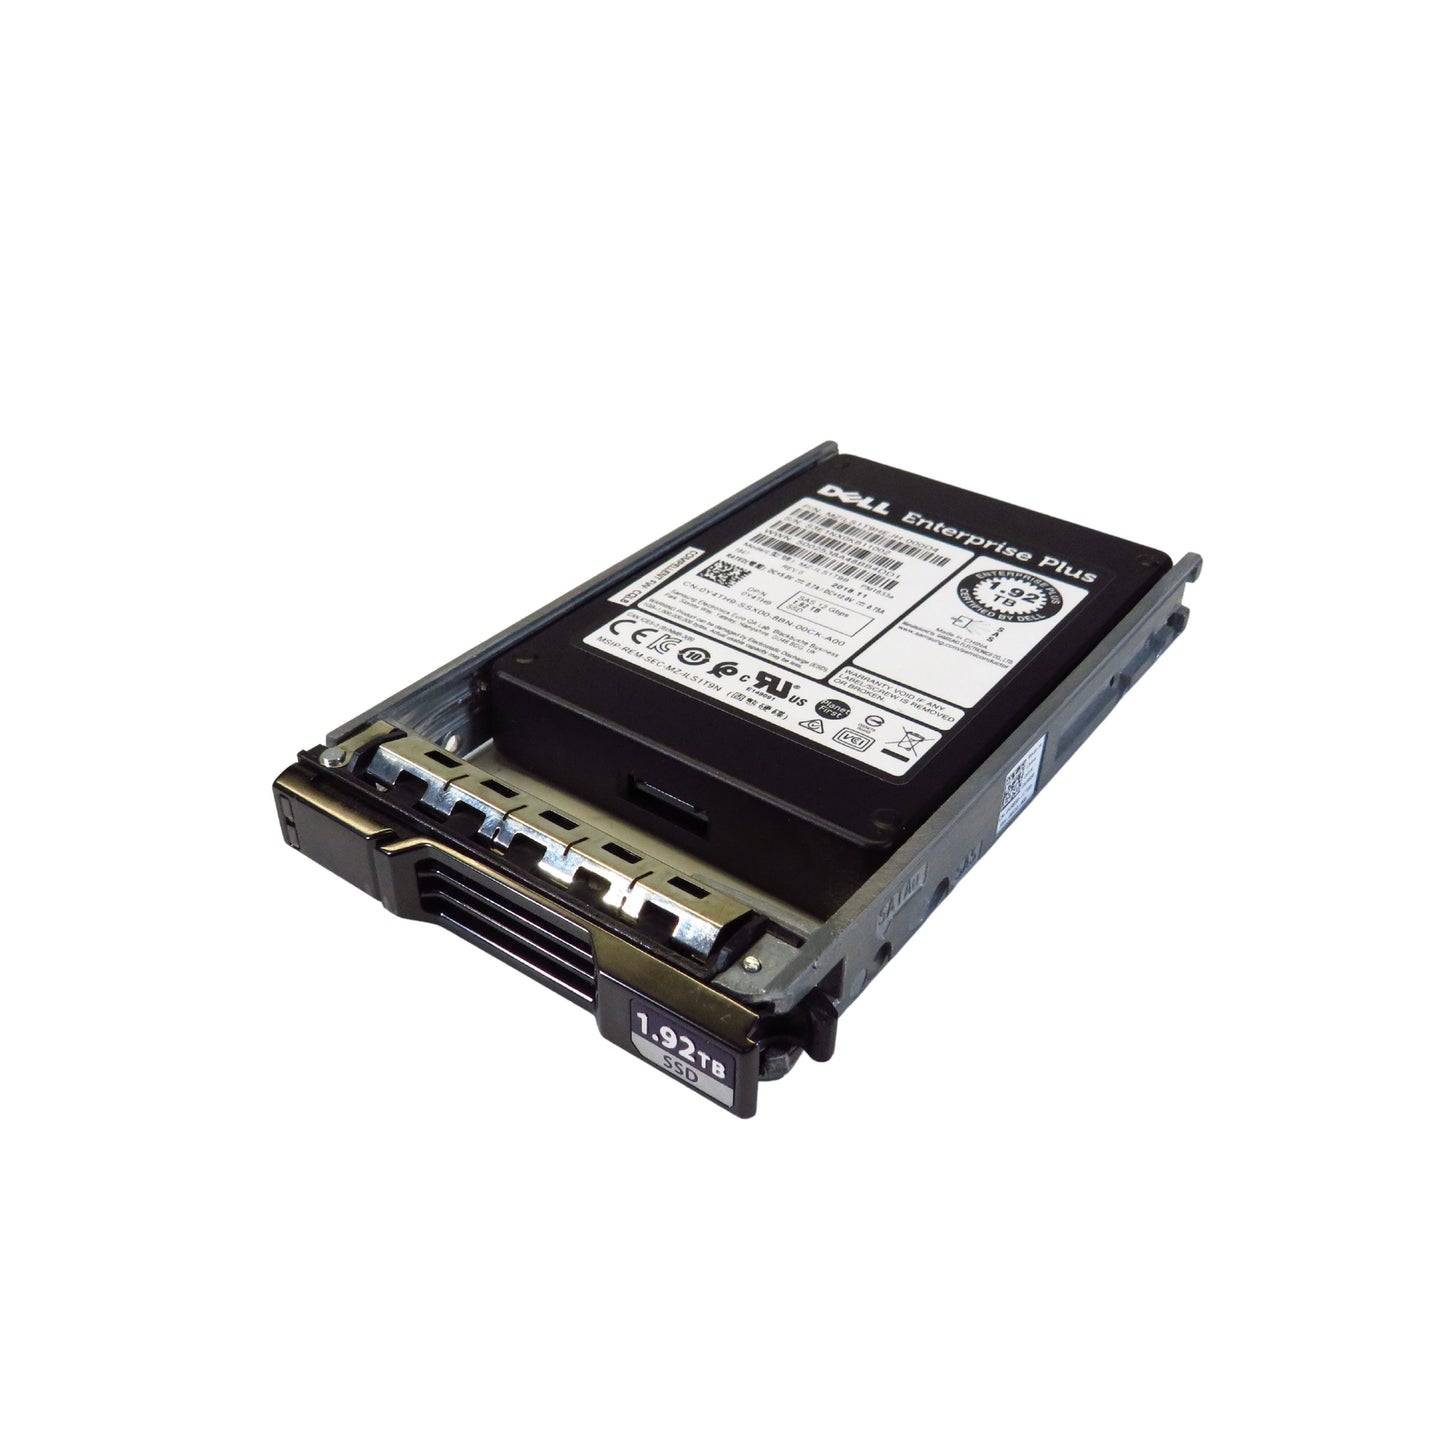 Compellent Y4TH9 1.92TB 2.5" SAS 12Gbps SSF SSD Solid State Drive (Refurbished)